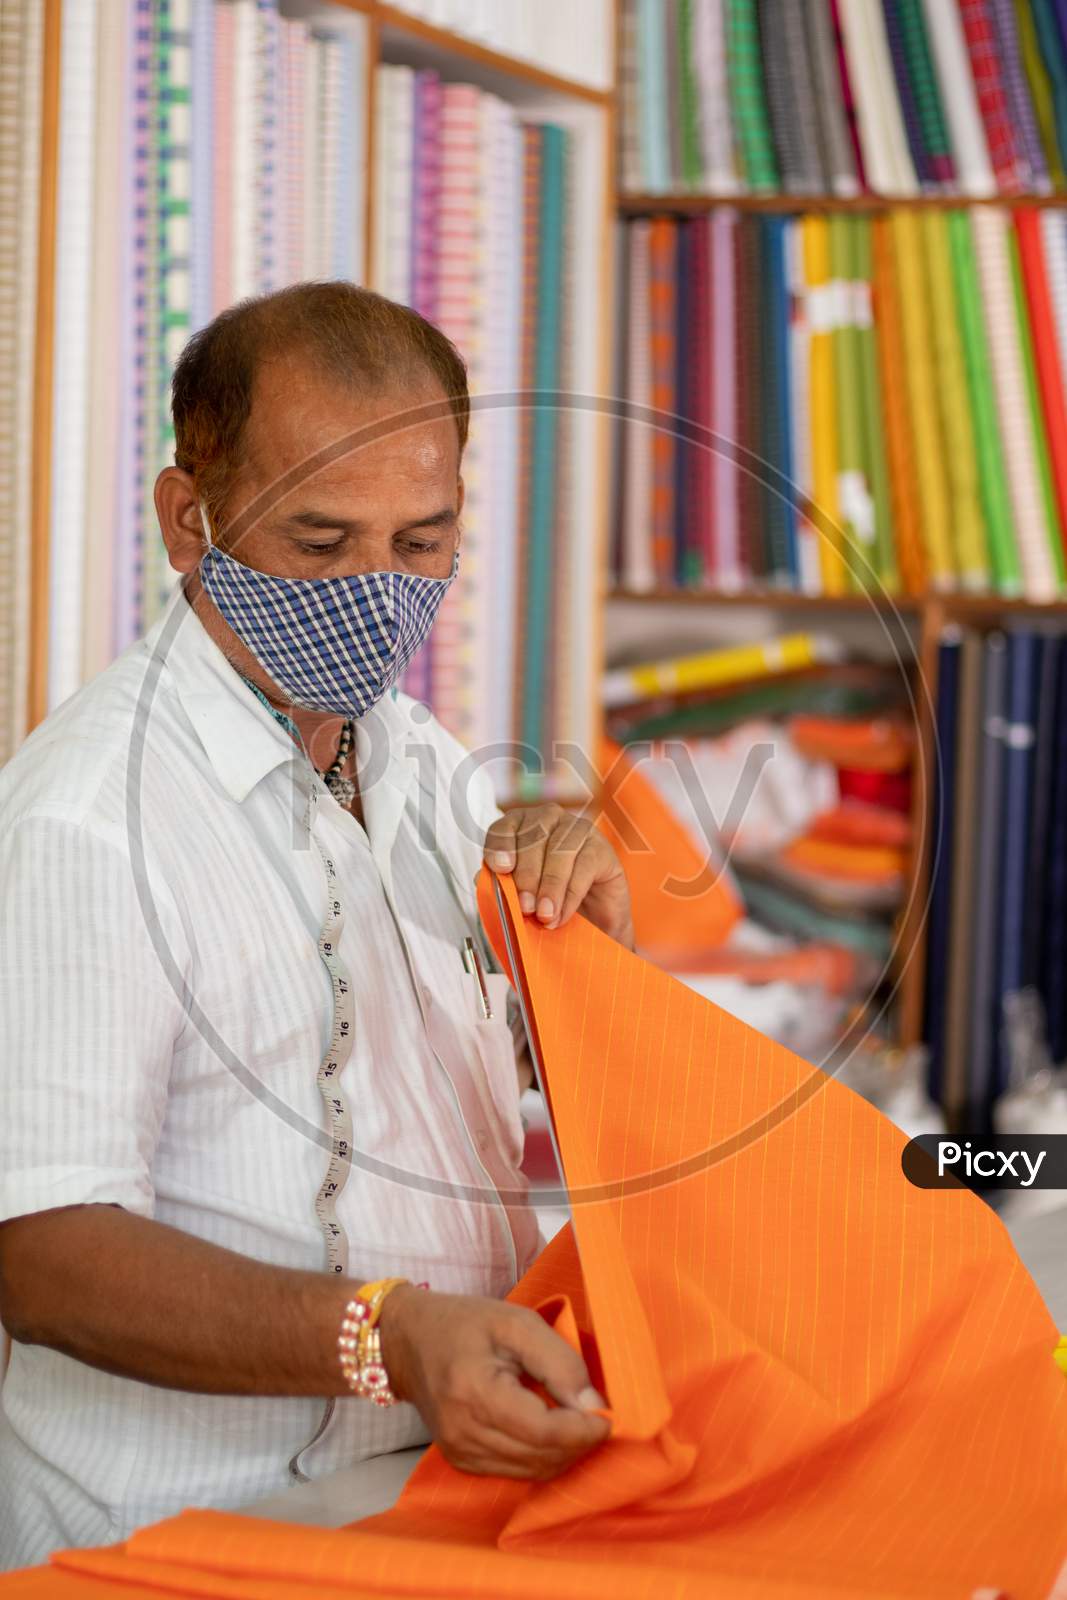 Shopkeeper In Medical Mask Measuring Cloth Using Scale Or Ruler - Concept Of Back To Business, Business Reopen After Covid-19 Or Coronavirus Pandemic.